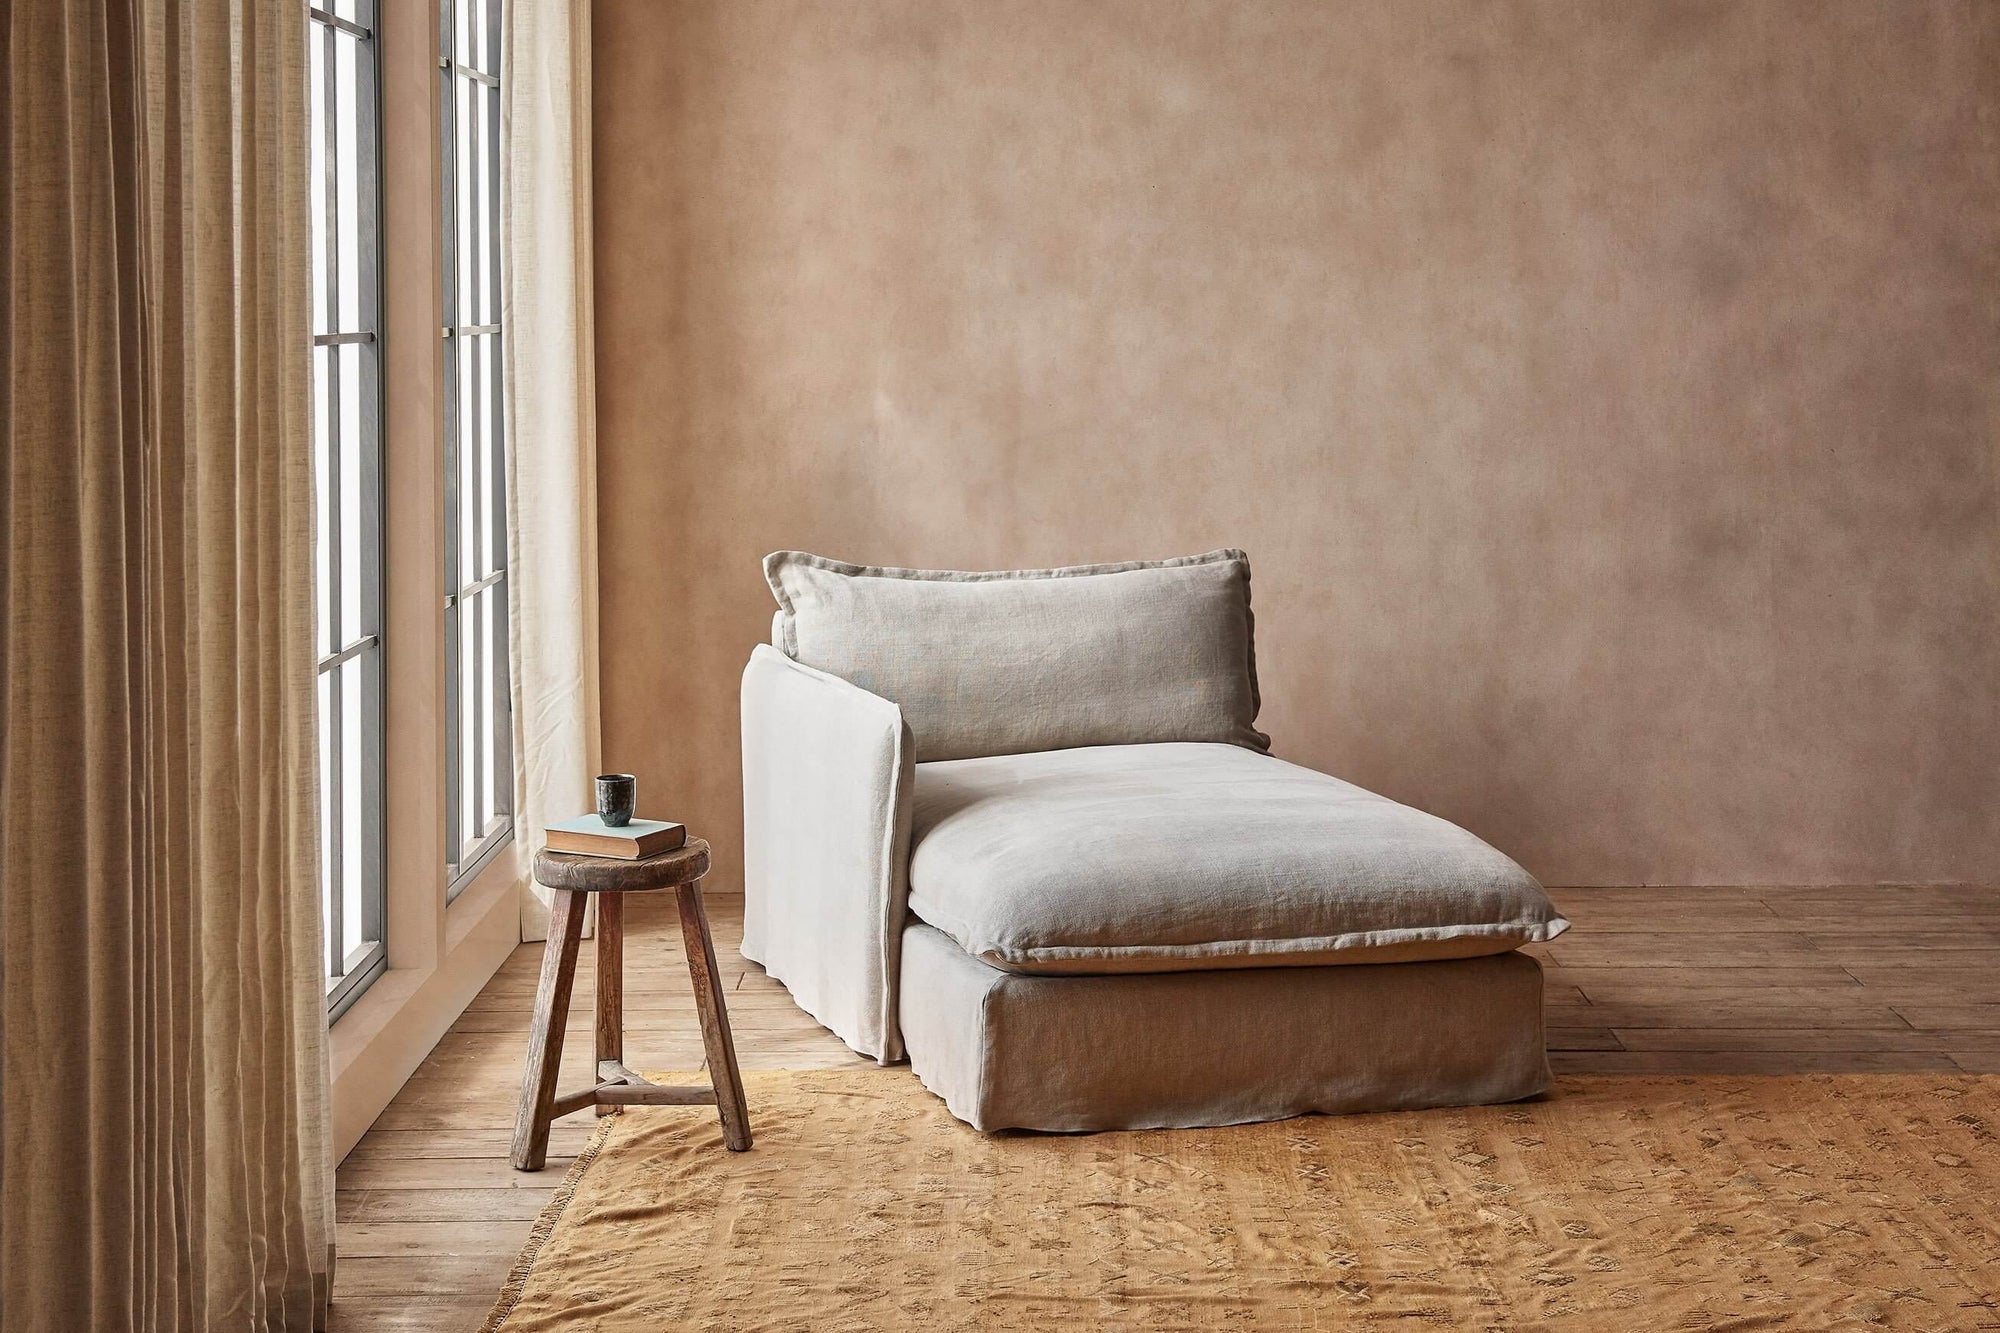 Neva Left Arm Facing Daybed in Jasmine Rice, a light warm greige Medium Weight Linen, placed in a room next to a large window and a stool holding a book and mug